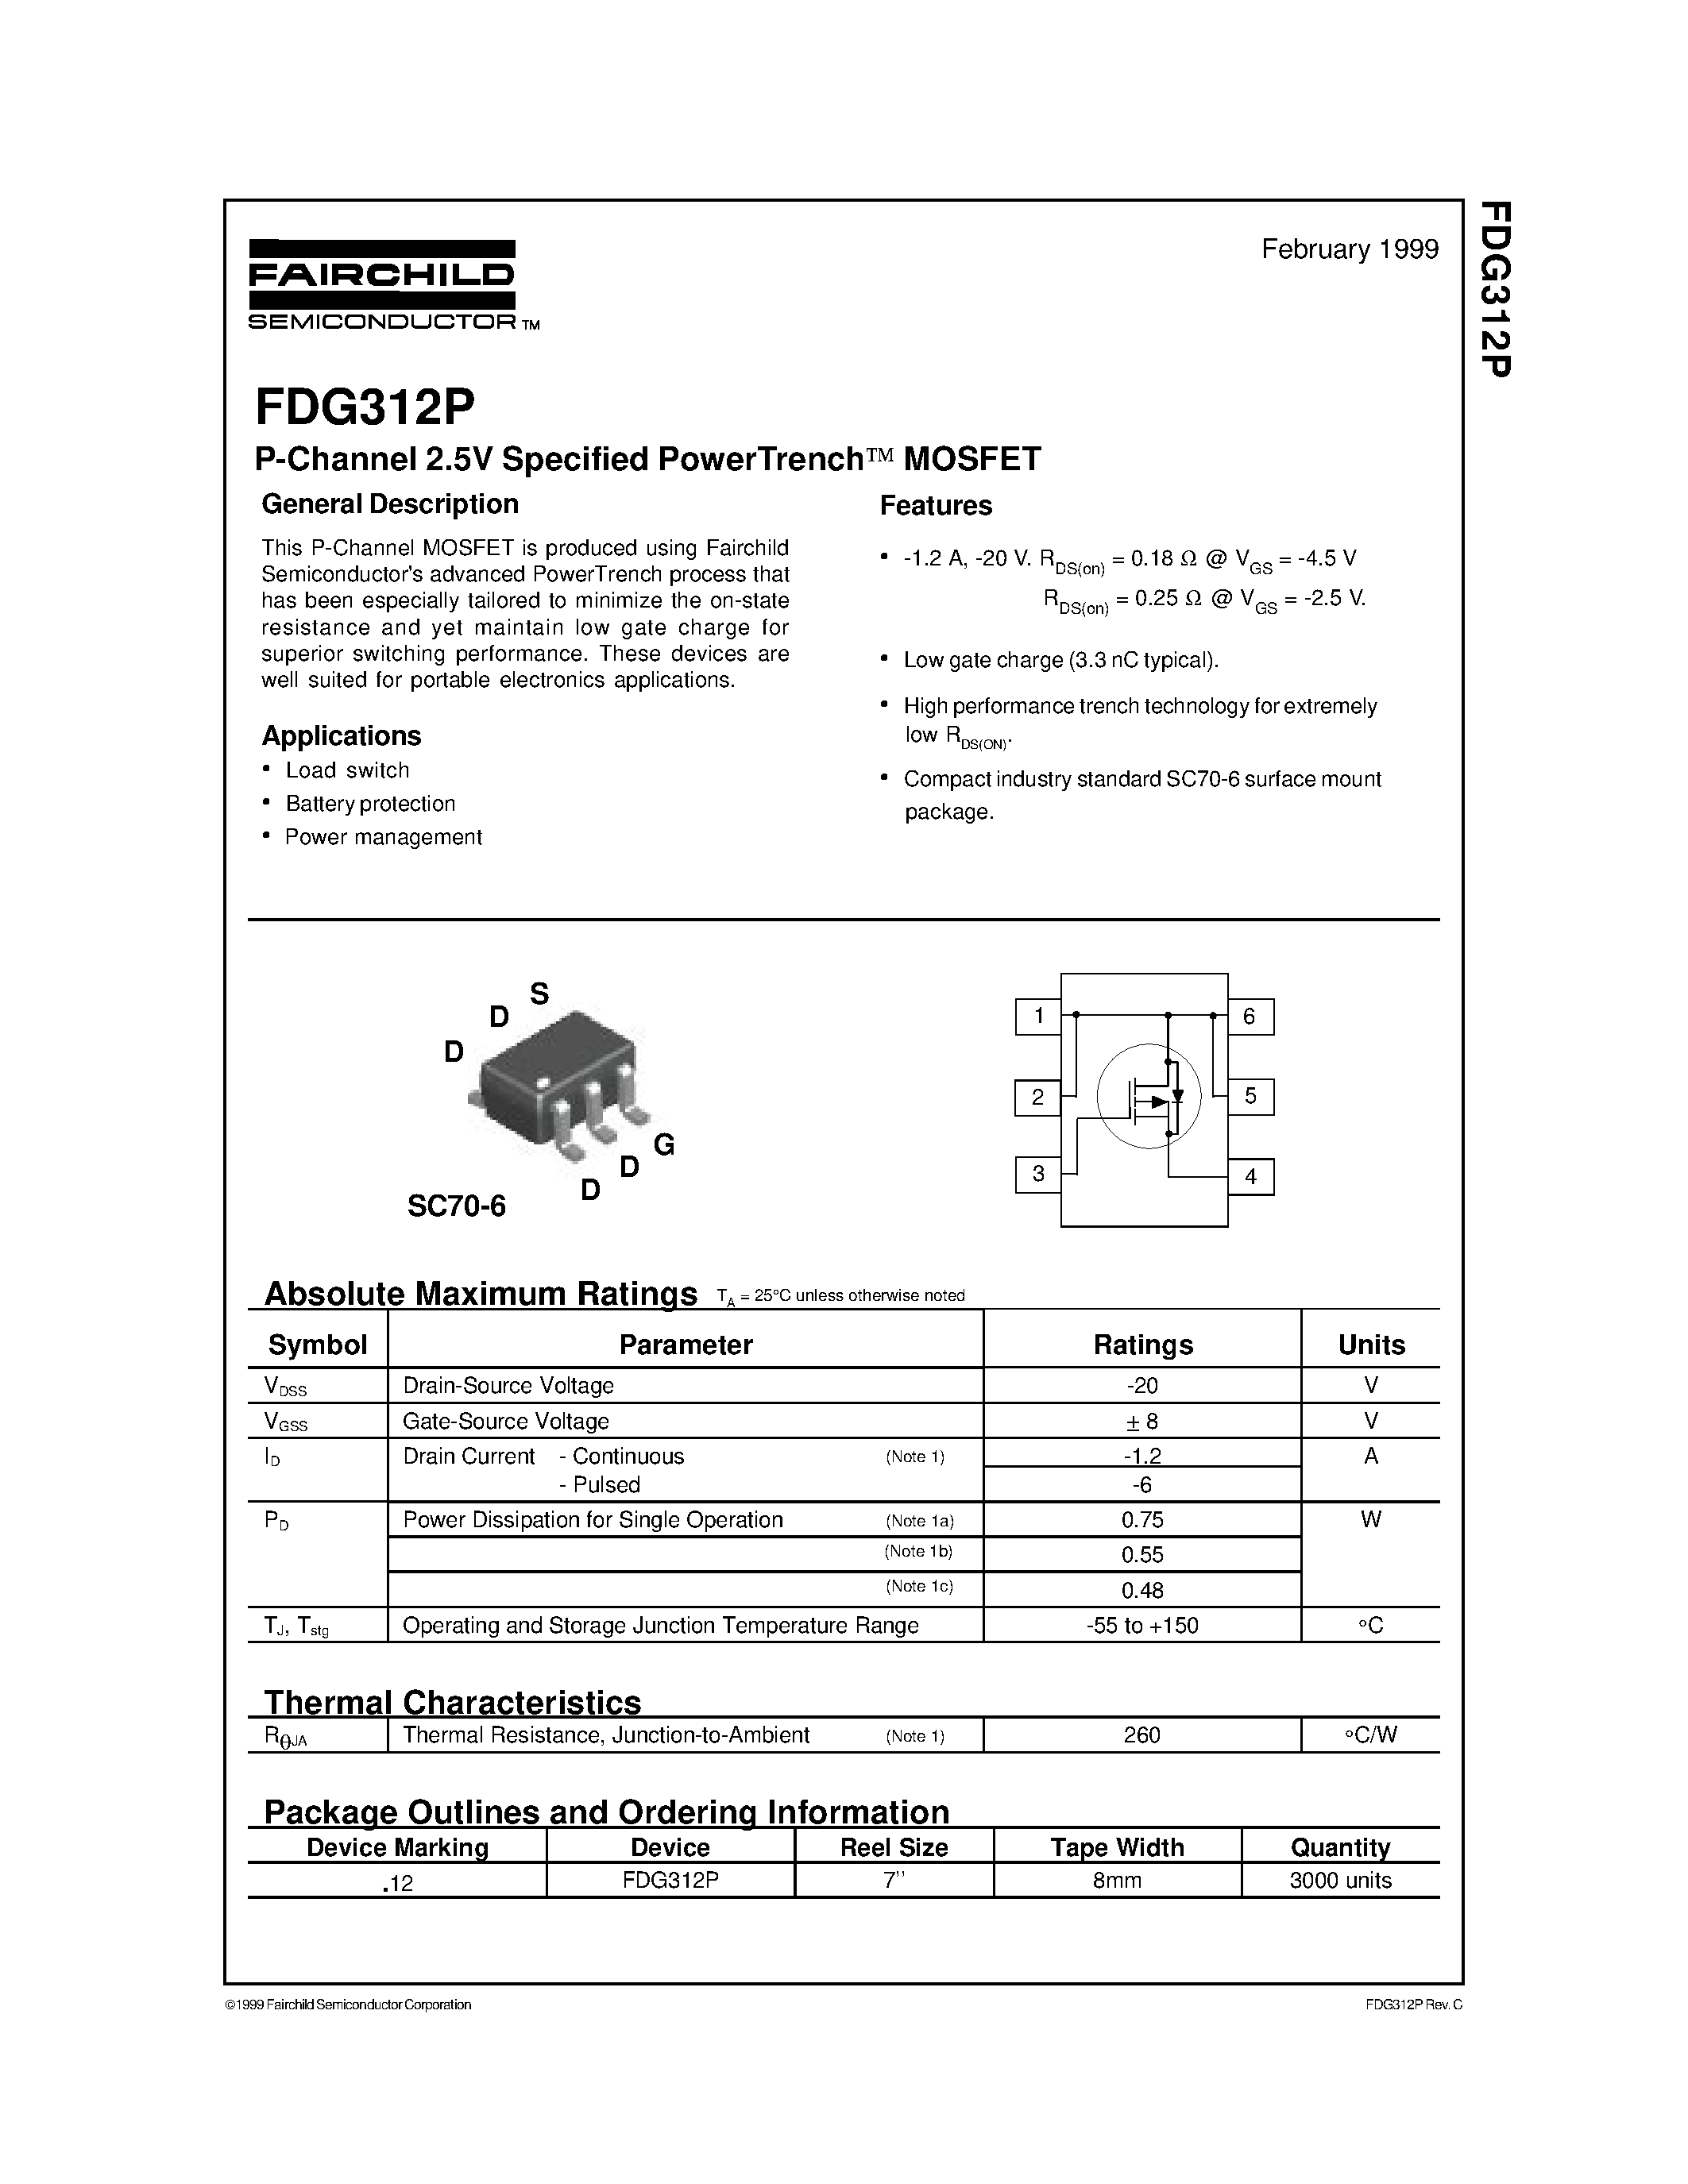 Datasheet FDG312P - P-Channel 2.5V Specified PowerTrench MOSFET page 1